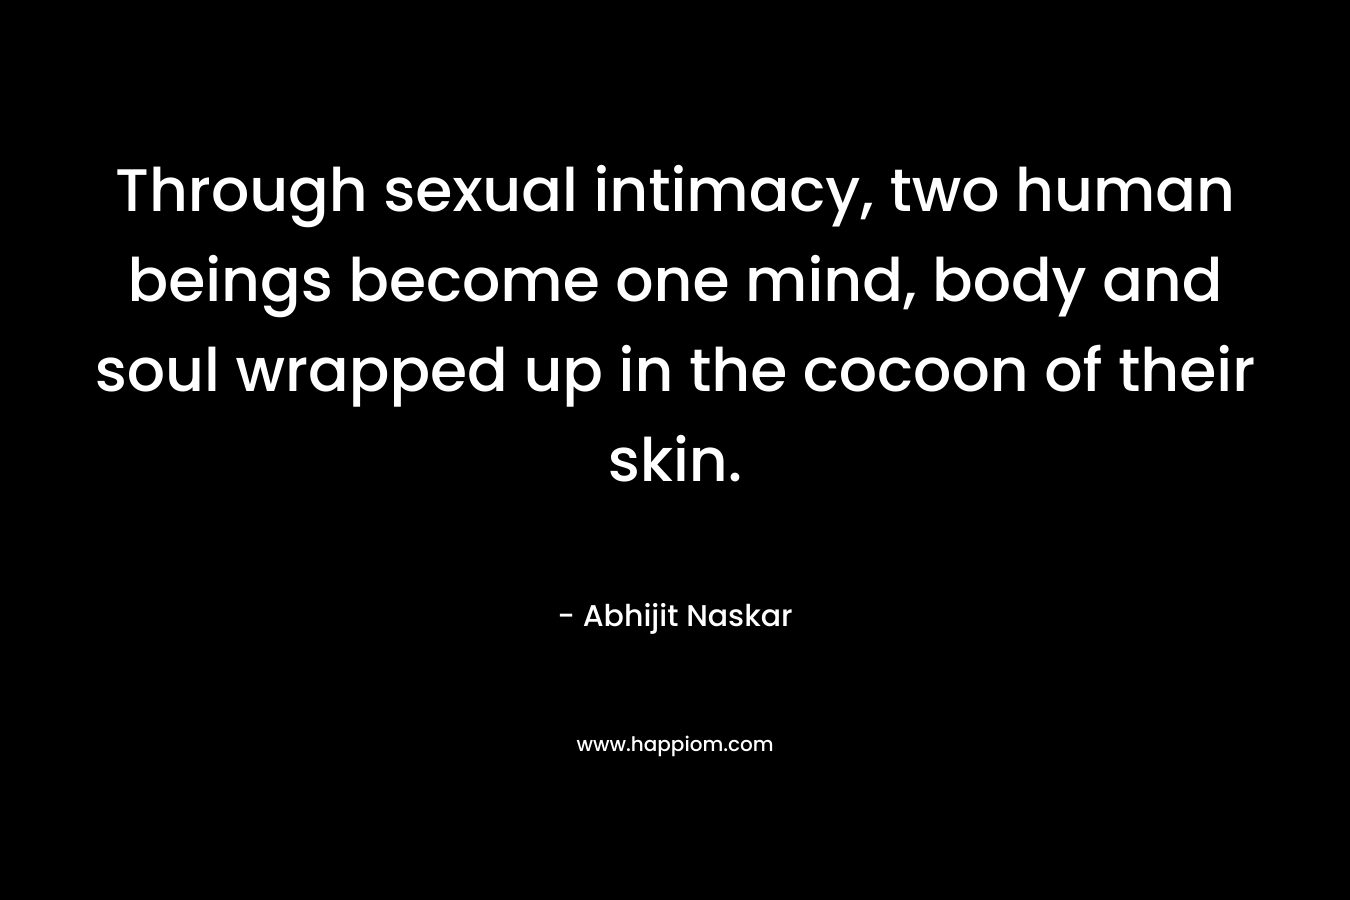 Through sexual intimacy, two human beings become one mind, body and soul wrapped up in the cocoon of their skin.